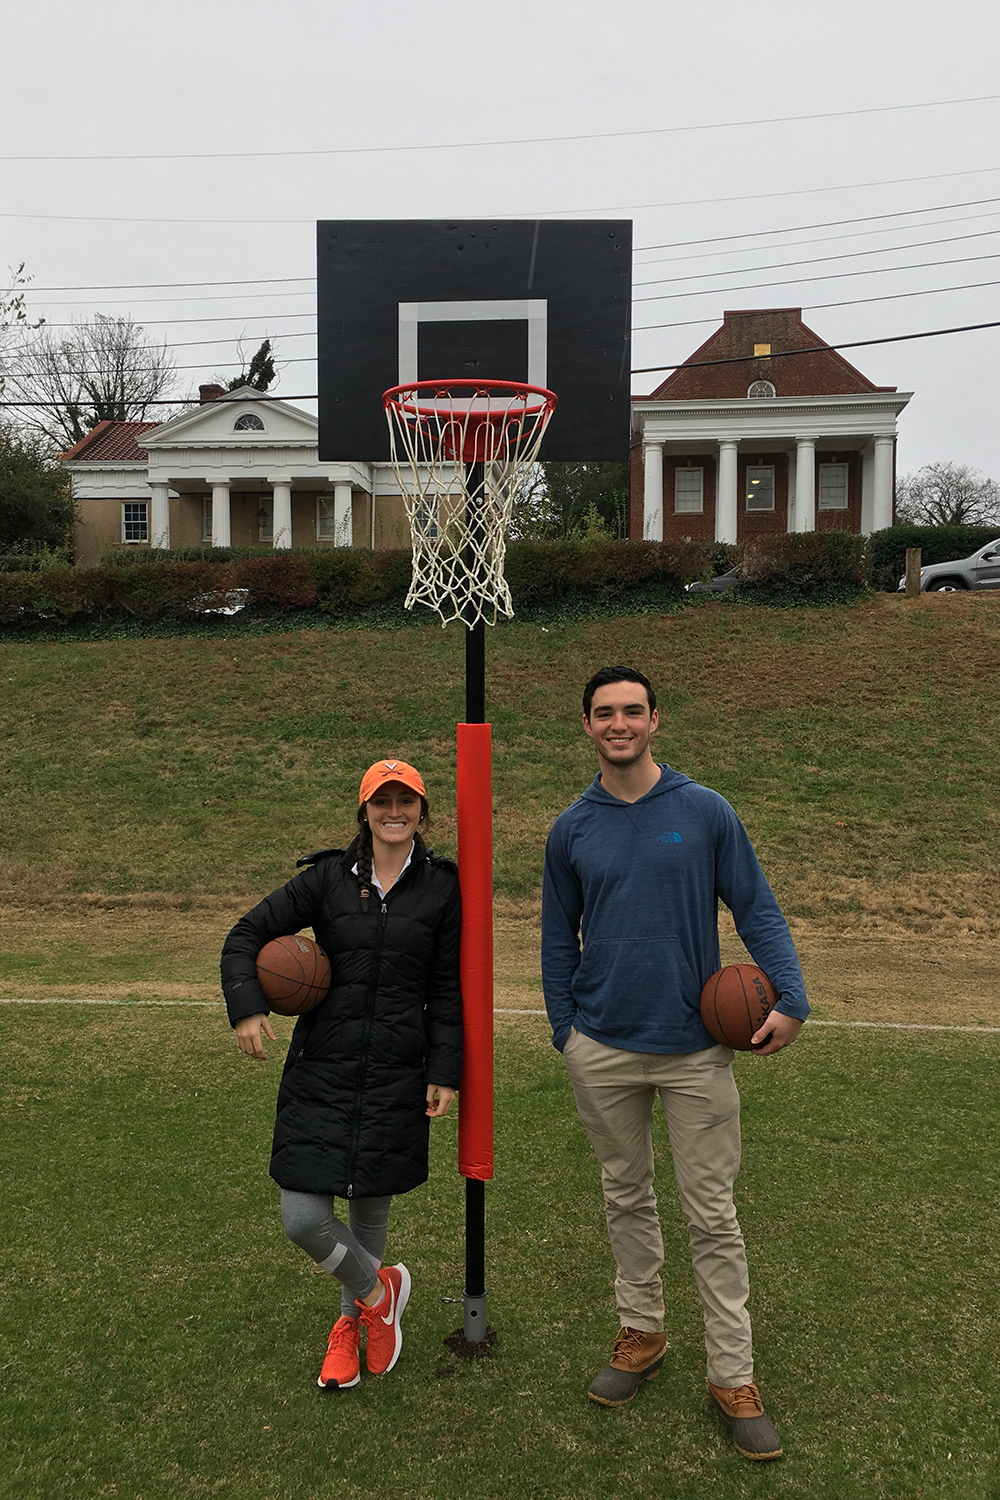 f Molly Shields, left, and Tim Shields hold basketballs while standing on an outdoor basketball court